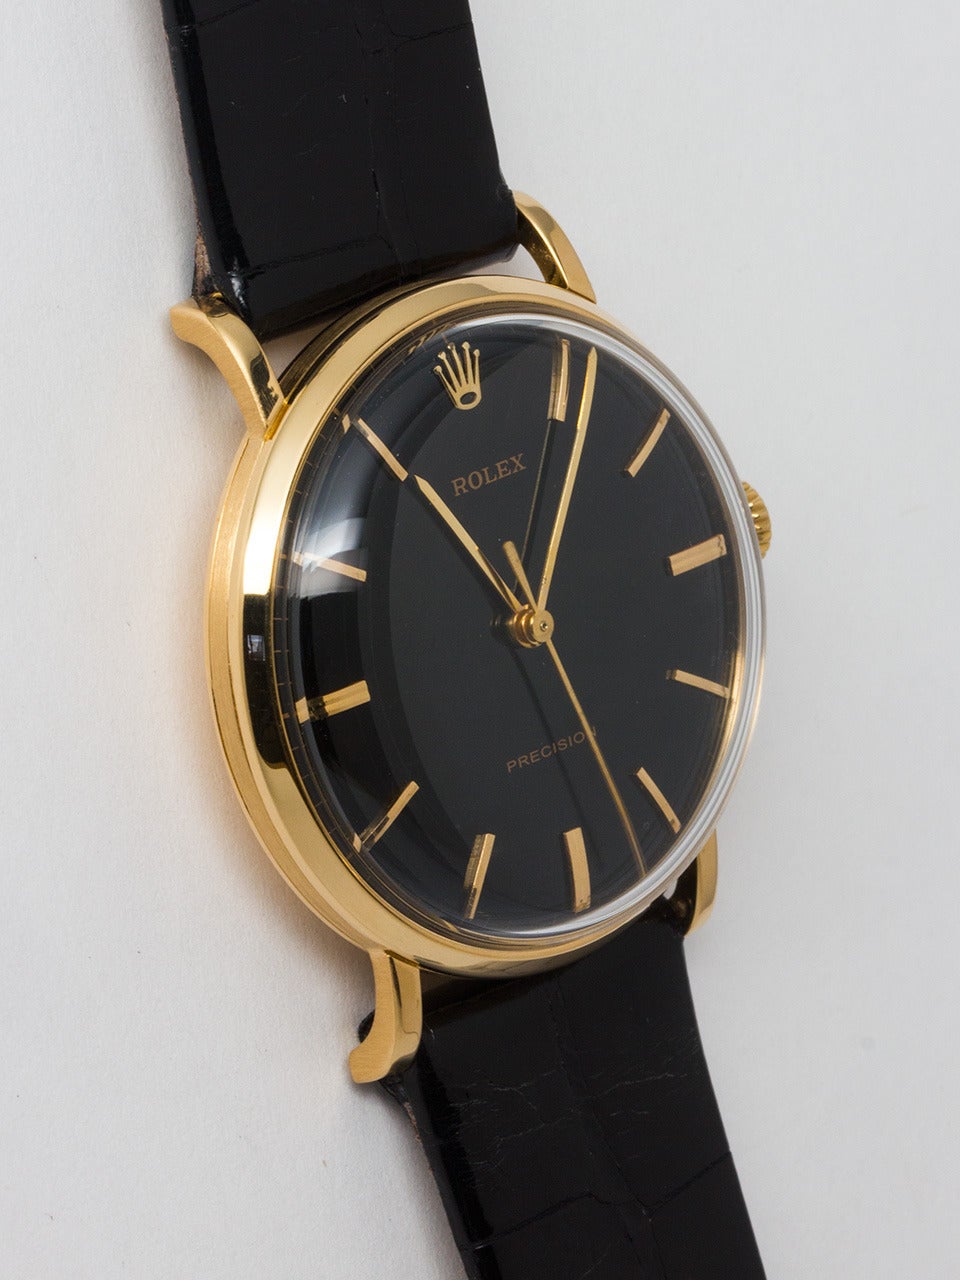 Rolex 18K Yellow Gold Dress Wristwatch circa 1960. 35mm diameter case with acrylic crystal and beautifully restored glossy black dial with applied gold indexes and gilt baton hands. Powered by Rolex caliber 1210 17 jewel manual wind movement with